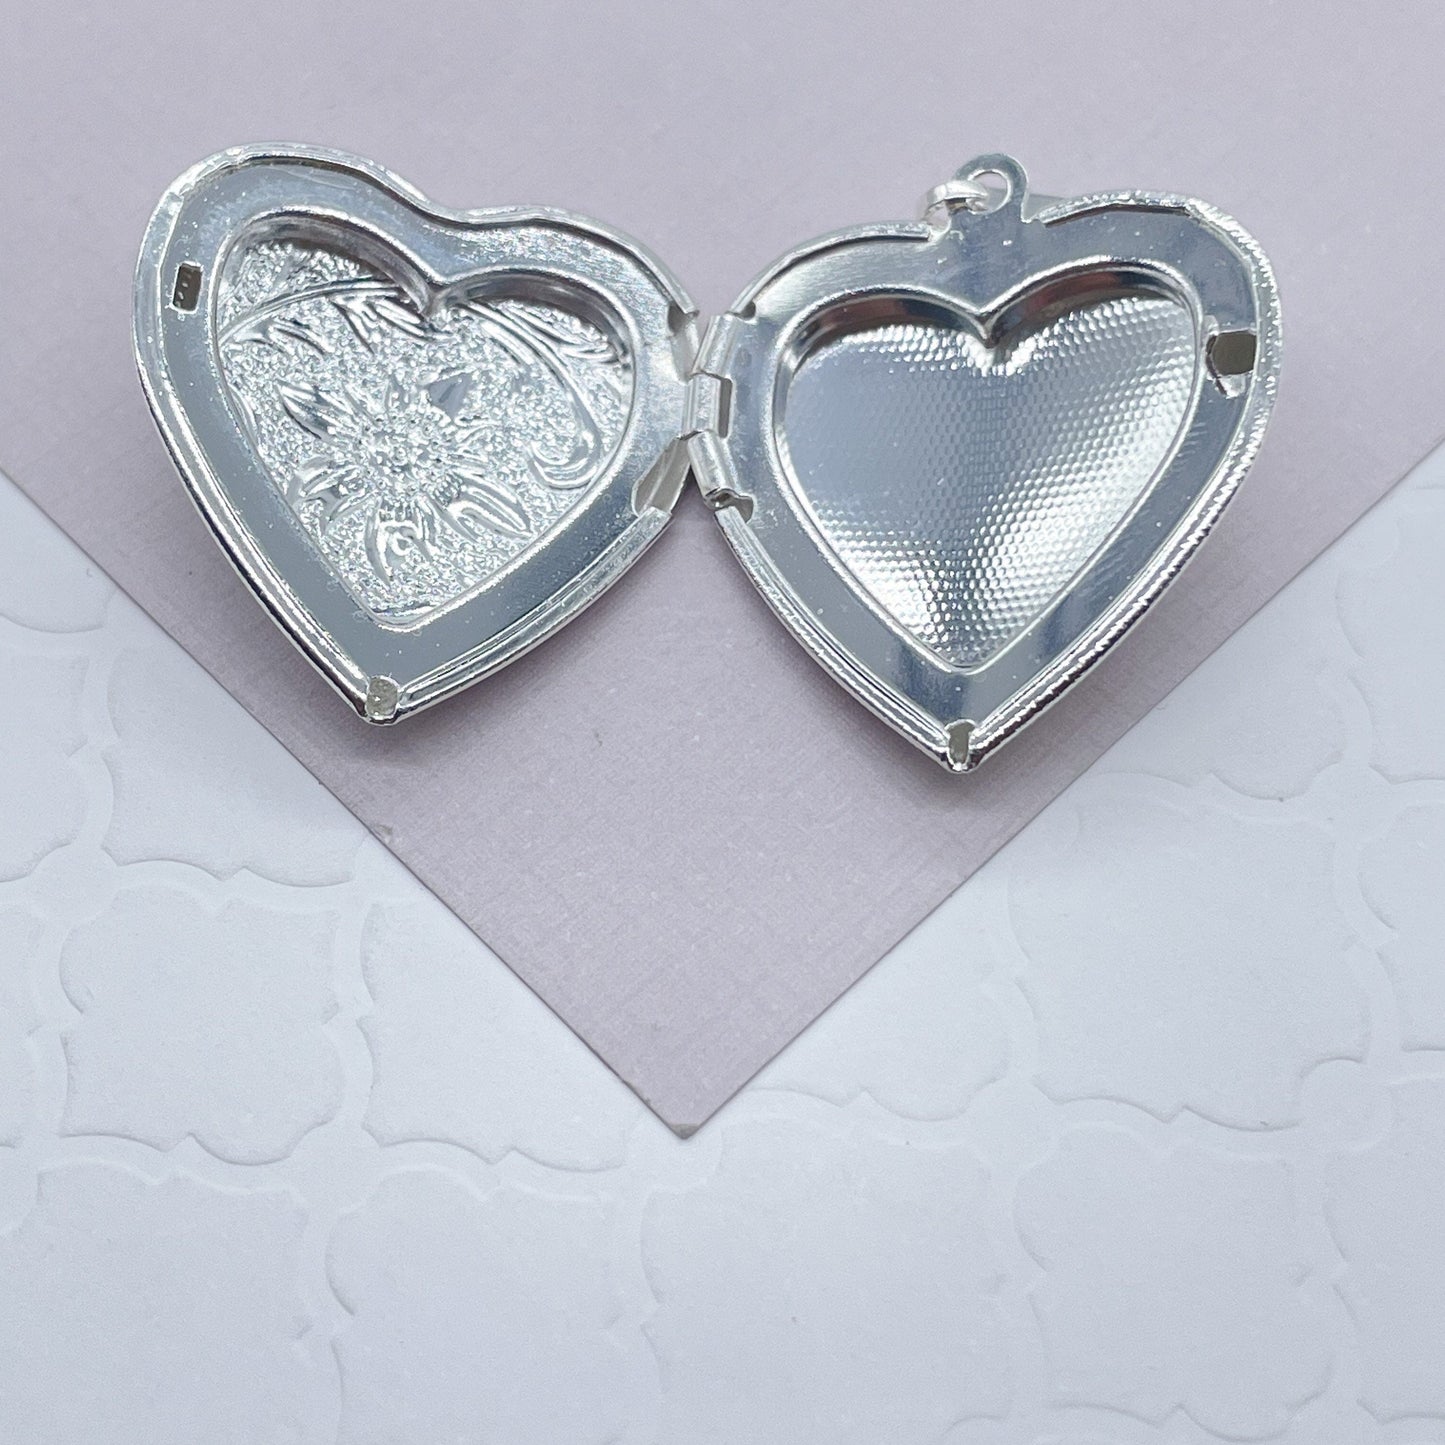 Silver Filled Heart Locket For Picture, Pendant Charm For Necklace, Love Gift